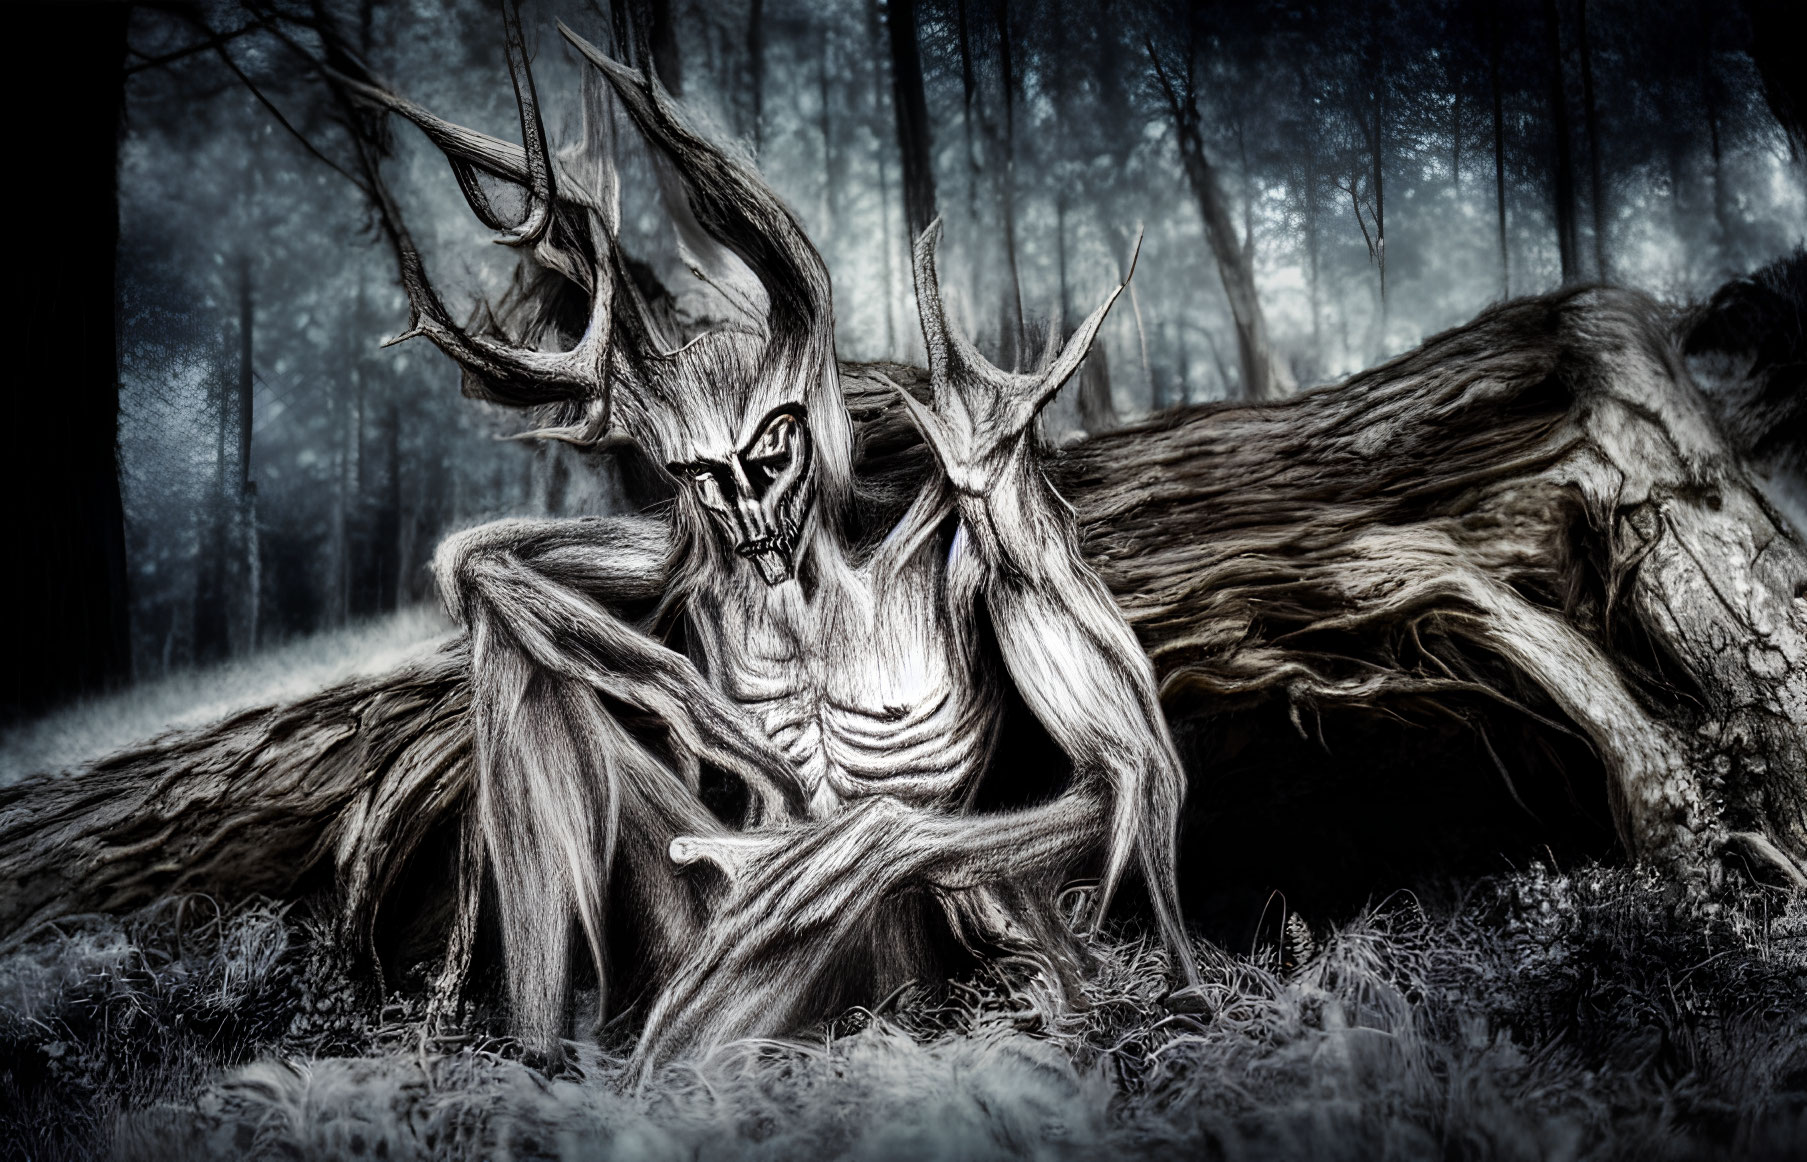 Monochrome fantasy artwork of skeletal tree-like creature with antlers in misty forest